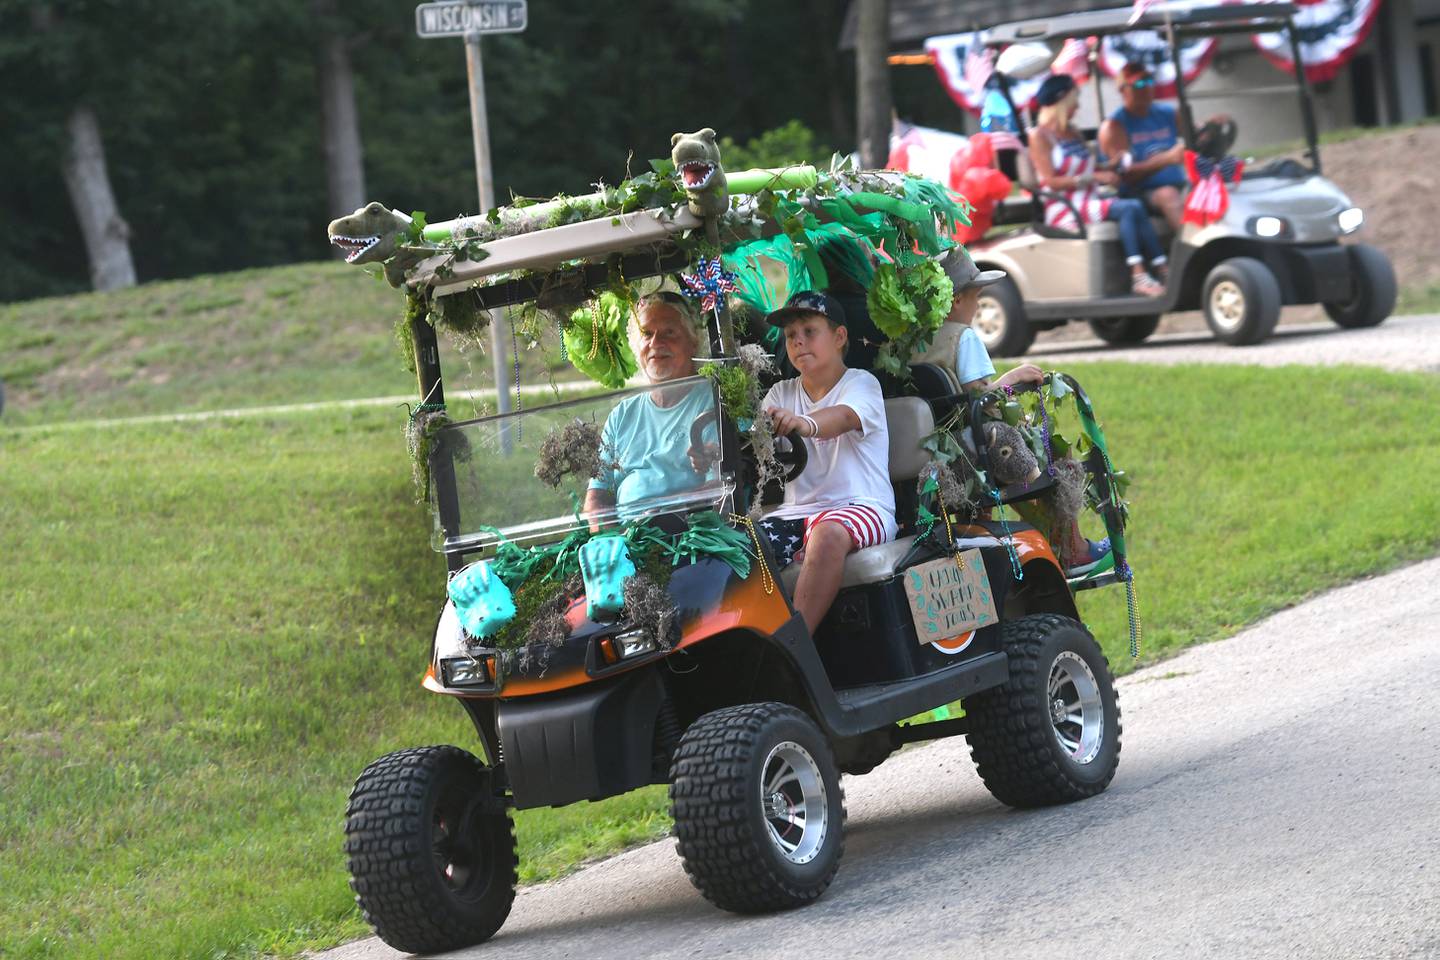 The Welty family decorated their golf cart as a Cajun Swamp Tours cart during the Grand Detour Golf Cart Parade on July 3. Here, Finn Sommers, 10, the grandson of Tom Welty drives the cart as Tom rides in the passenger seat. Finn and his brother and sister Ryder, 8, and Isla 5, had the idea for this year's decorating theme after visiting Mississippi and taking a swamp tour. Ryder and Isla, along with their grandmother, Steffaney, rode in the back.